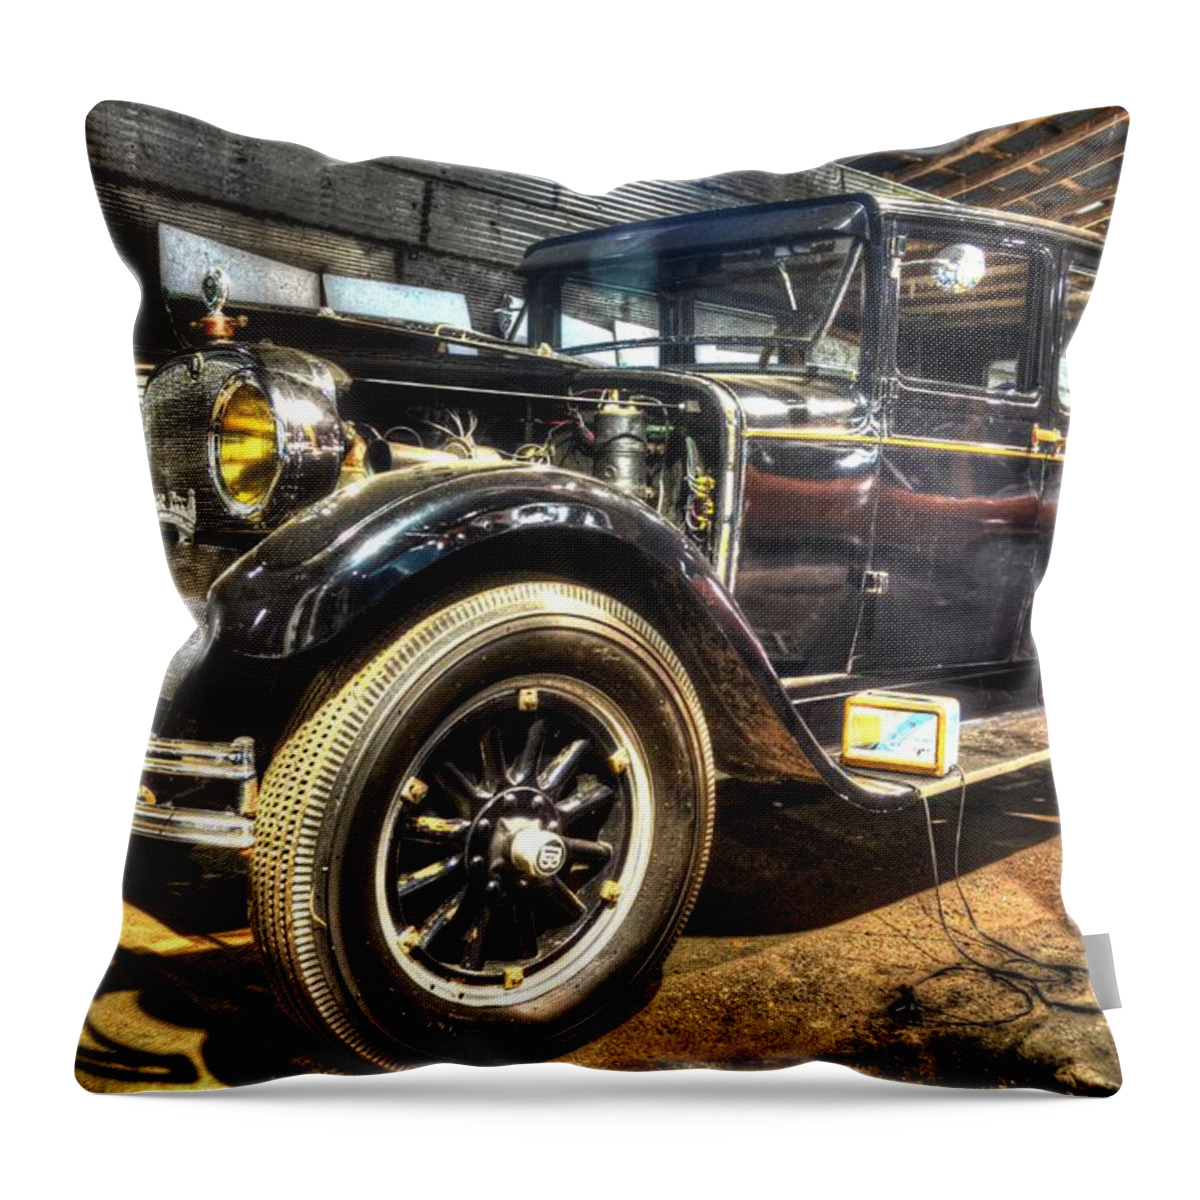 1927 Dodge Brothers Throw Pillow featuring the photograph 1927 Dodge Brothers by David Morefield